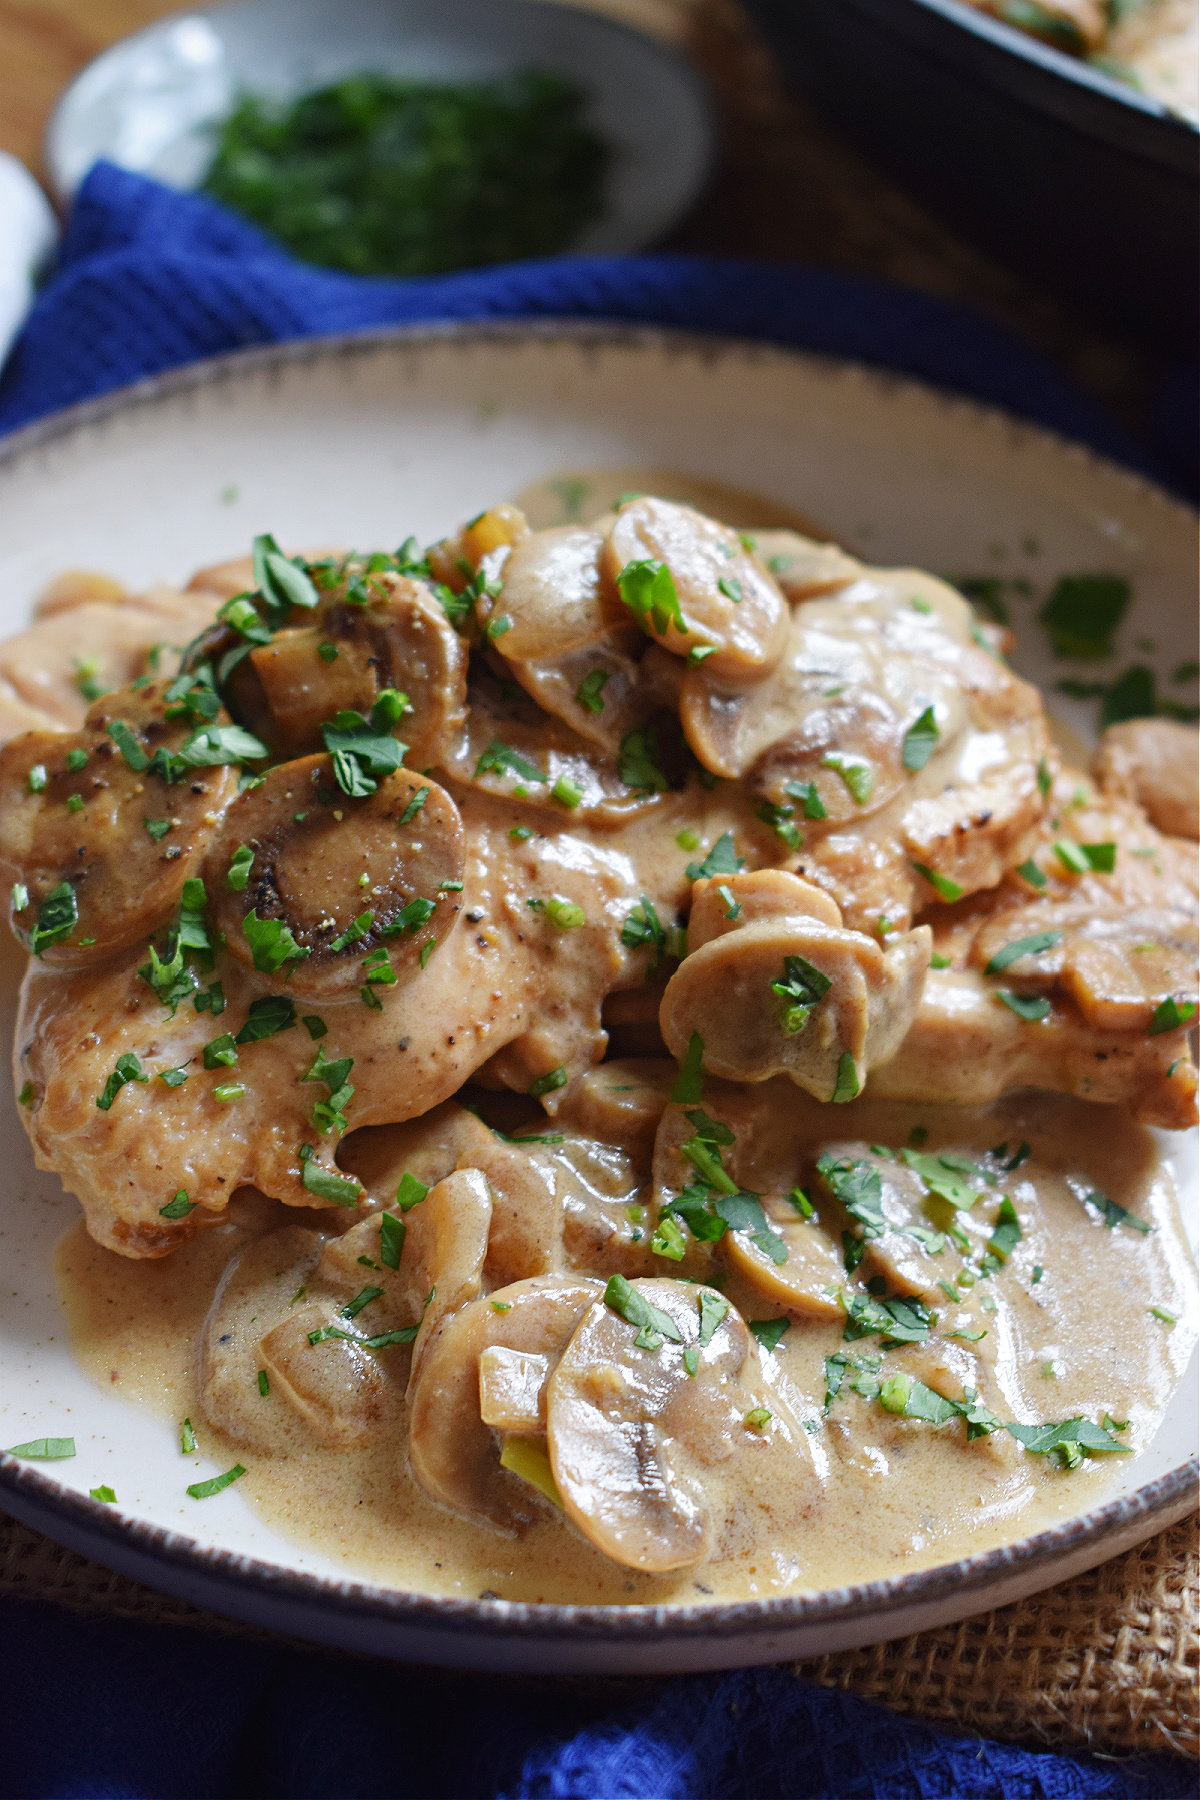 Turkey and mushrooms in a Creamy White Wine Sauce on a plate.